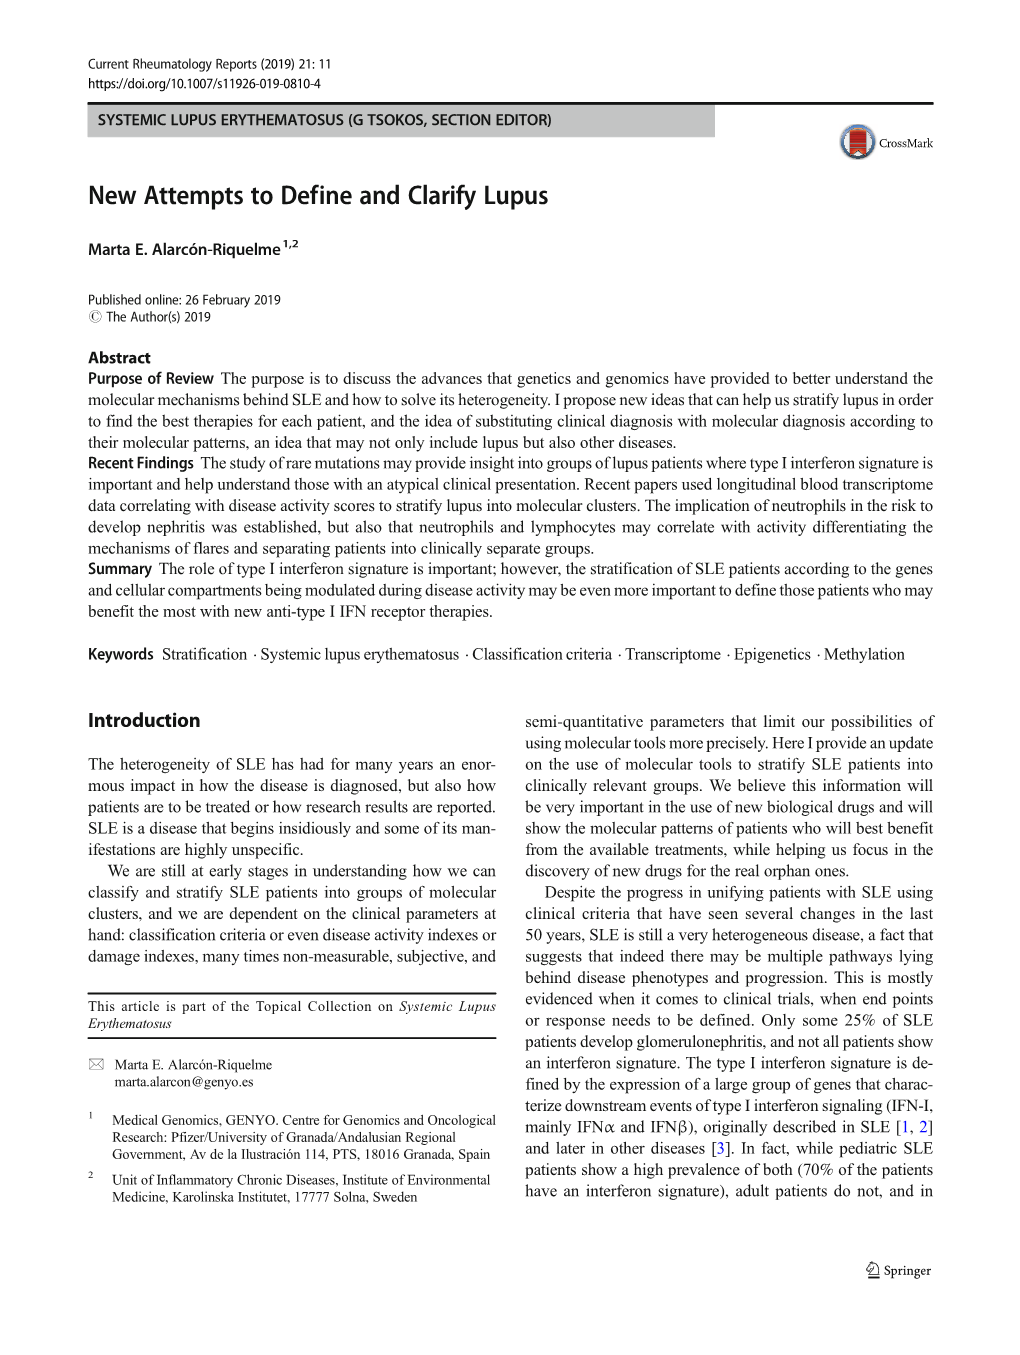 New Attempts to Define and Clarify Lupus